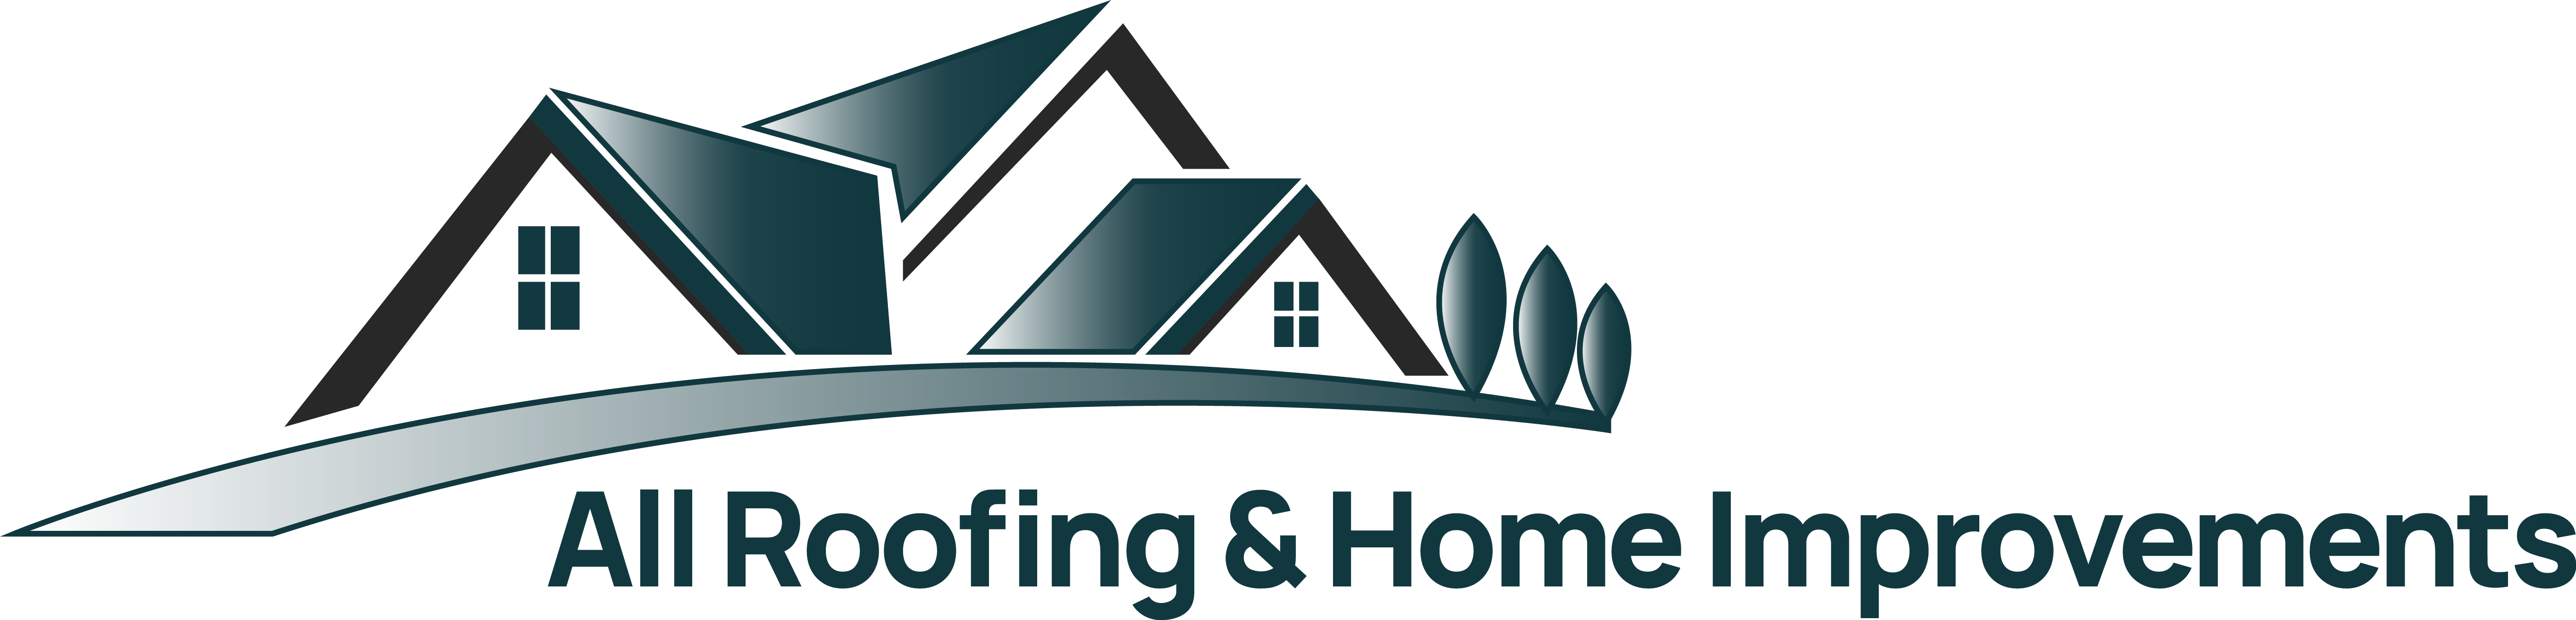 roofing and home improvements services in Surrey